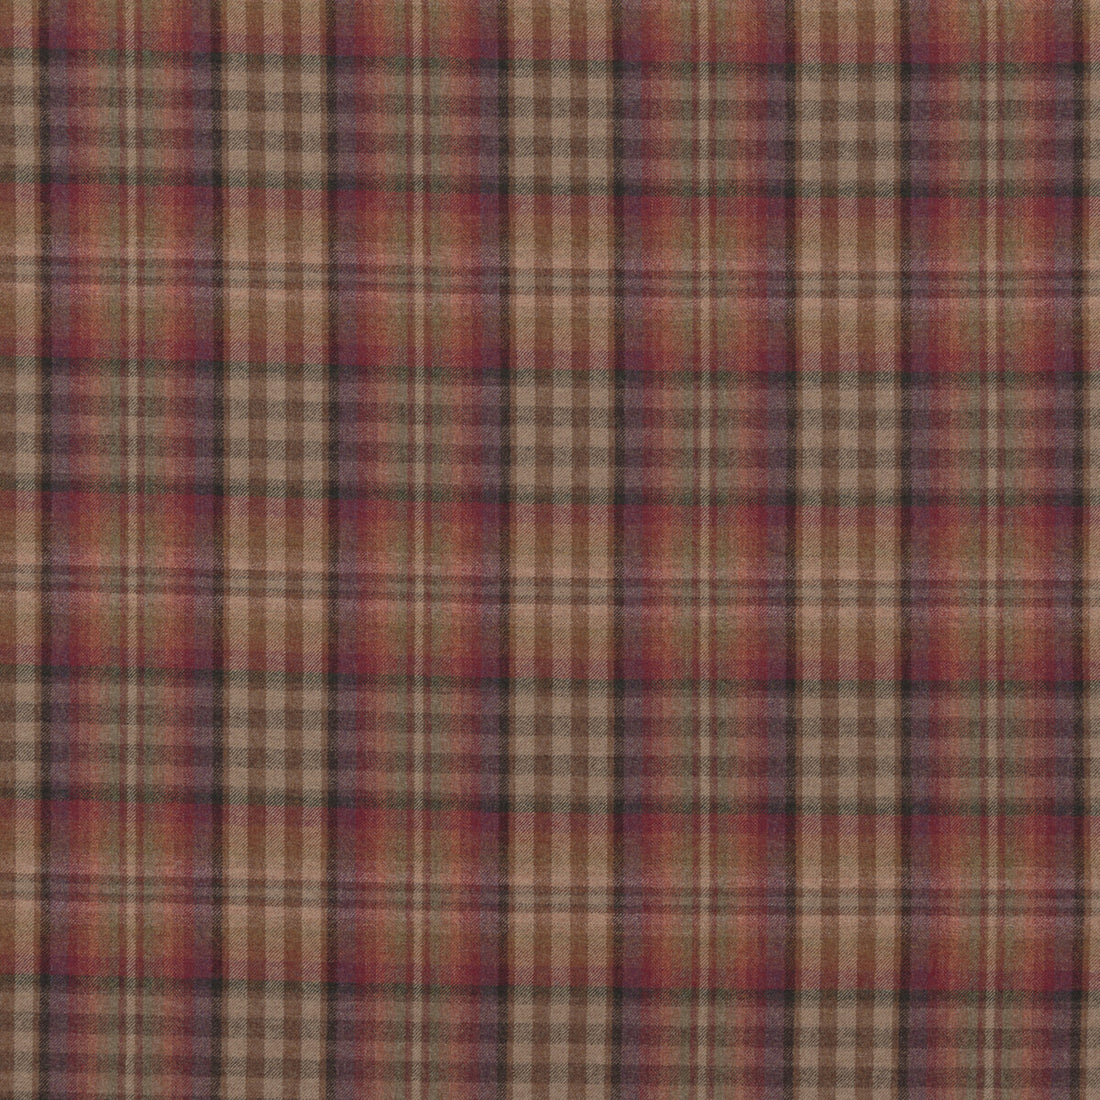 Nevis fabric in russet/mauve color - pattern FD748.V162.0 - by Mulberry in the Festival collection